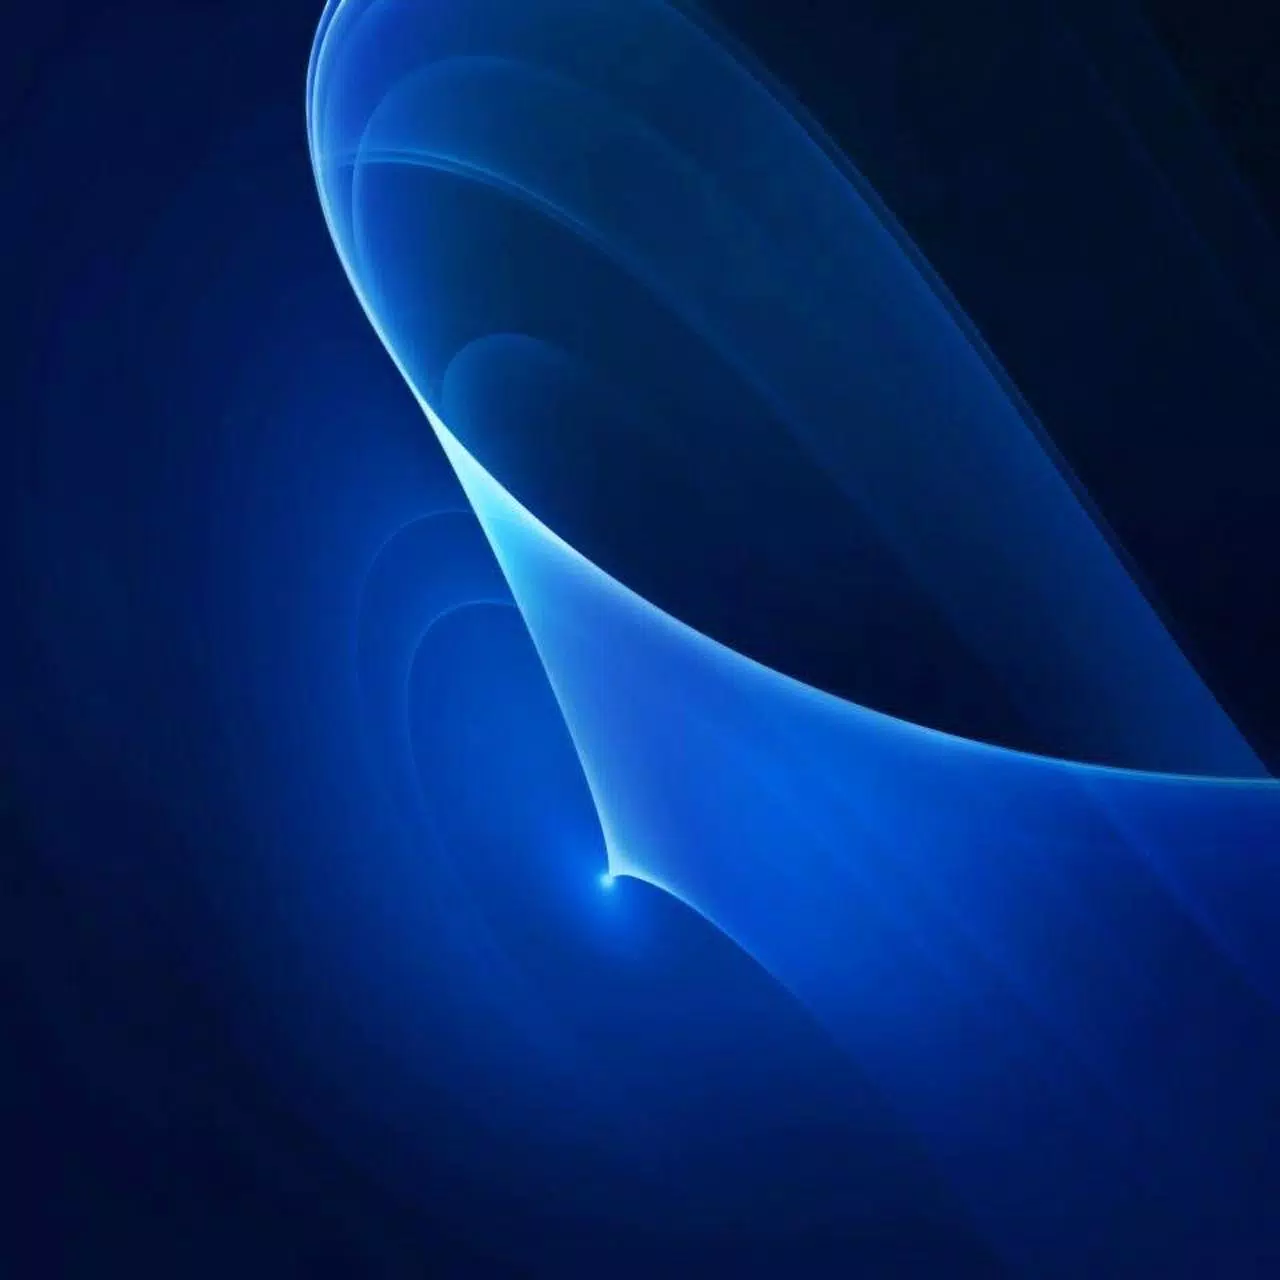 J2 J3 Samsung Wallpapers Hd Apk Pour Android Telecharger